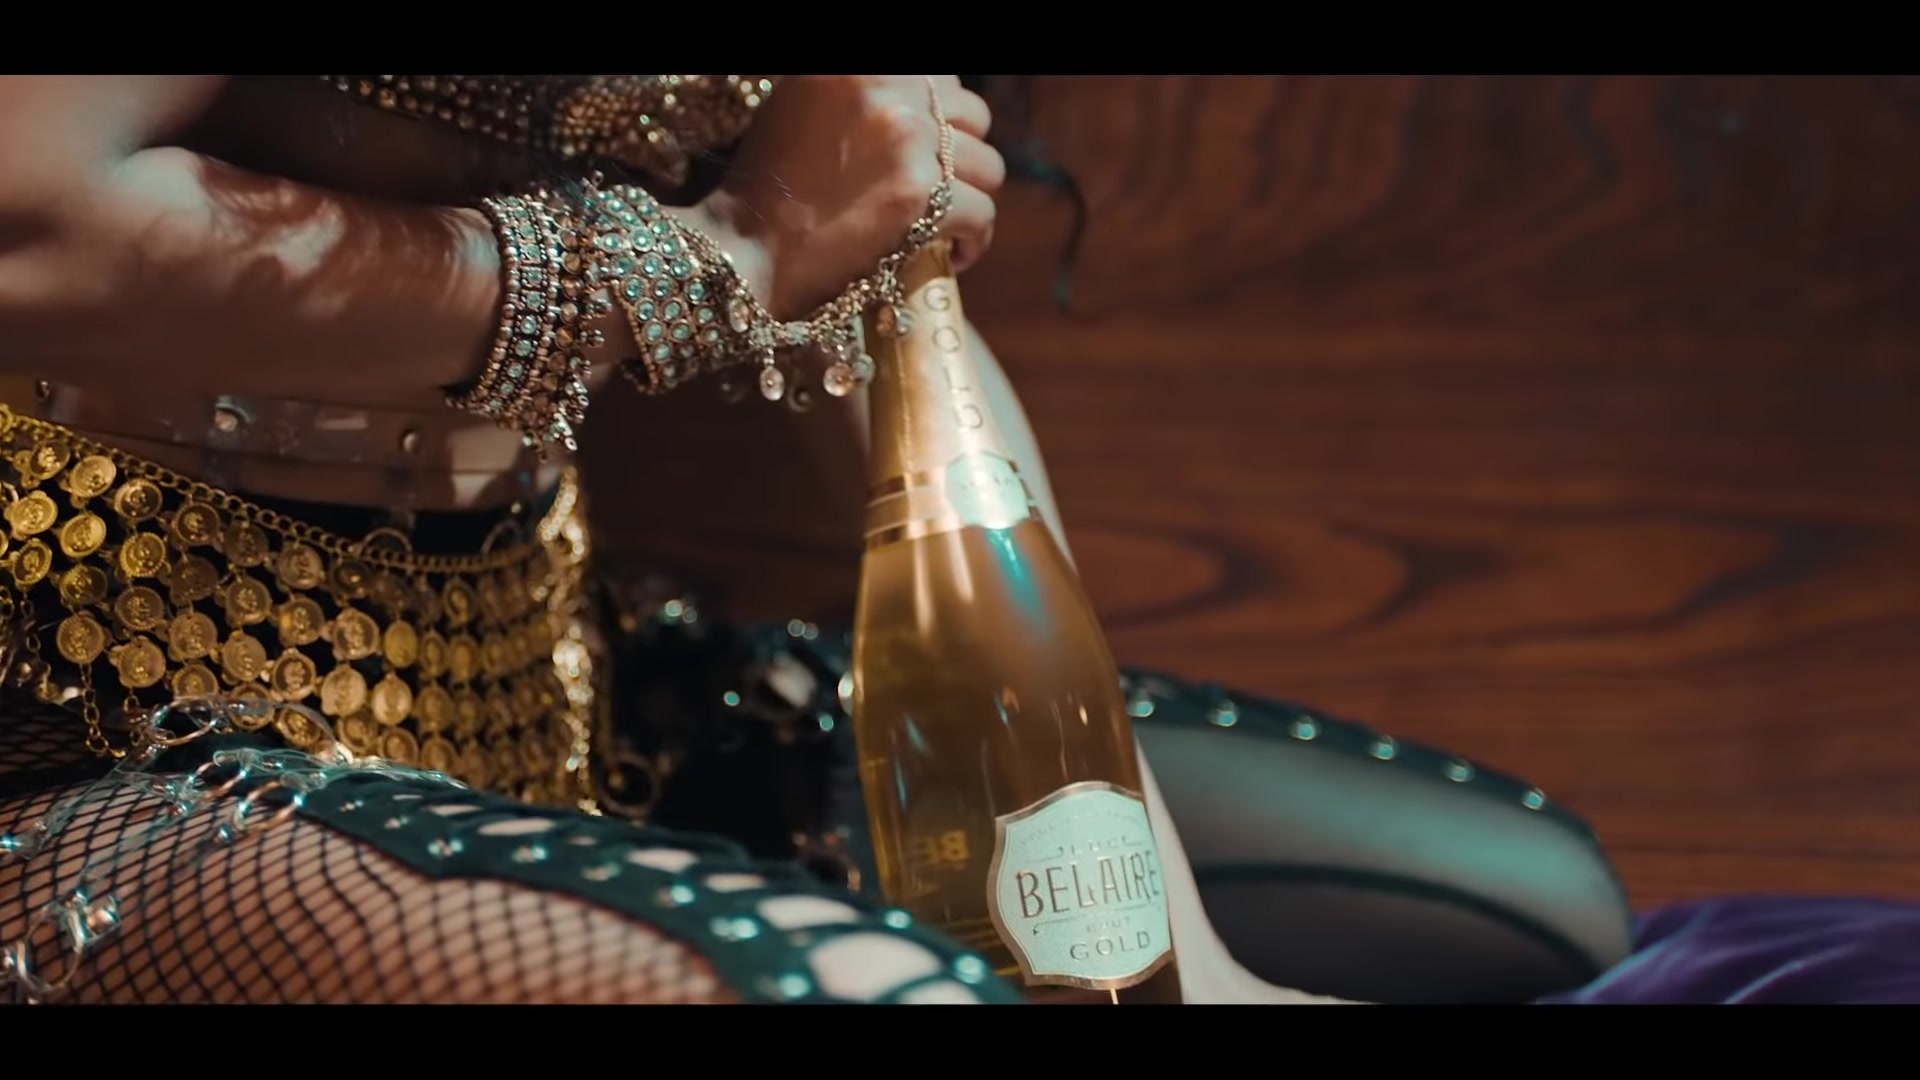 Luc Belaire Brut Gold Sparkling Wine In I M Not Goin By Gucci Mane Feat Kevin Gates 2018